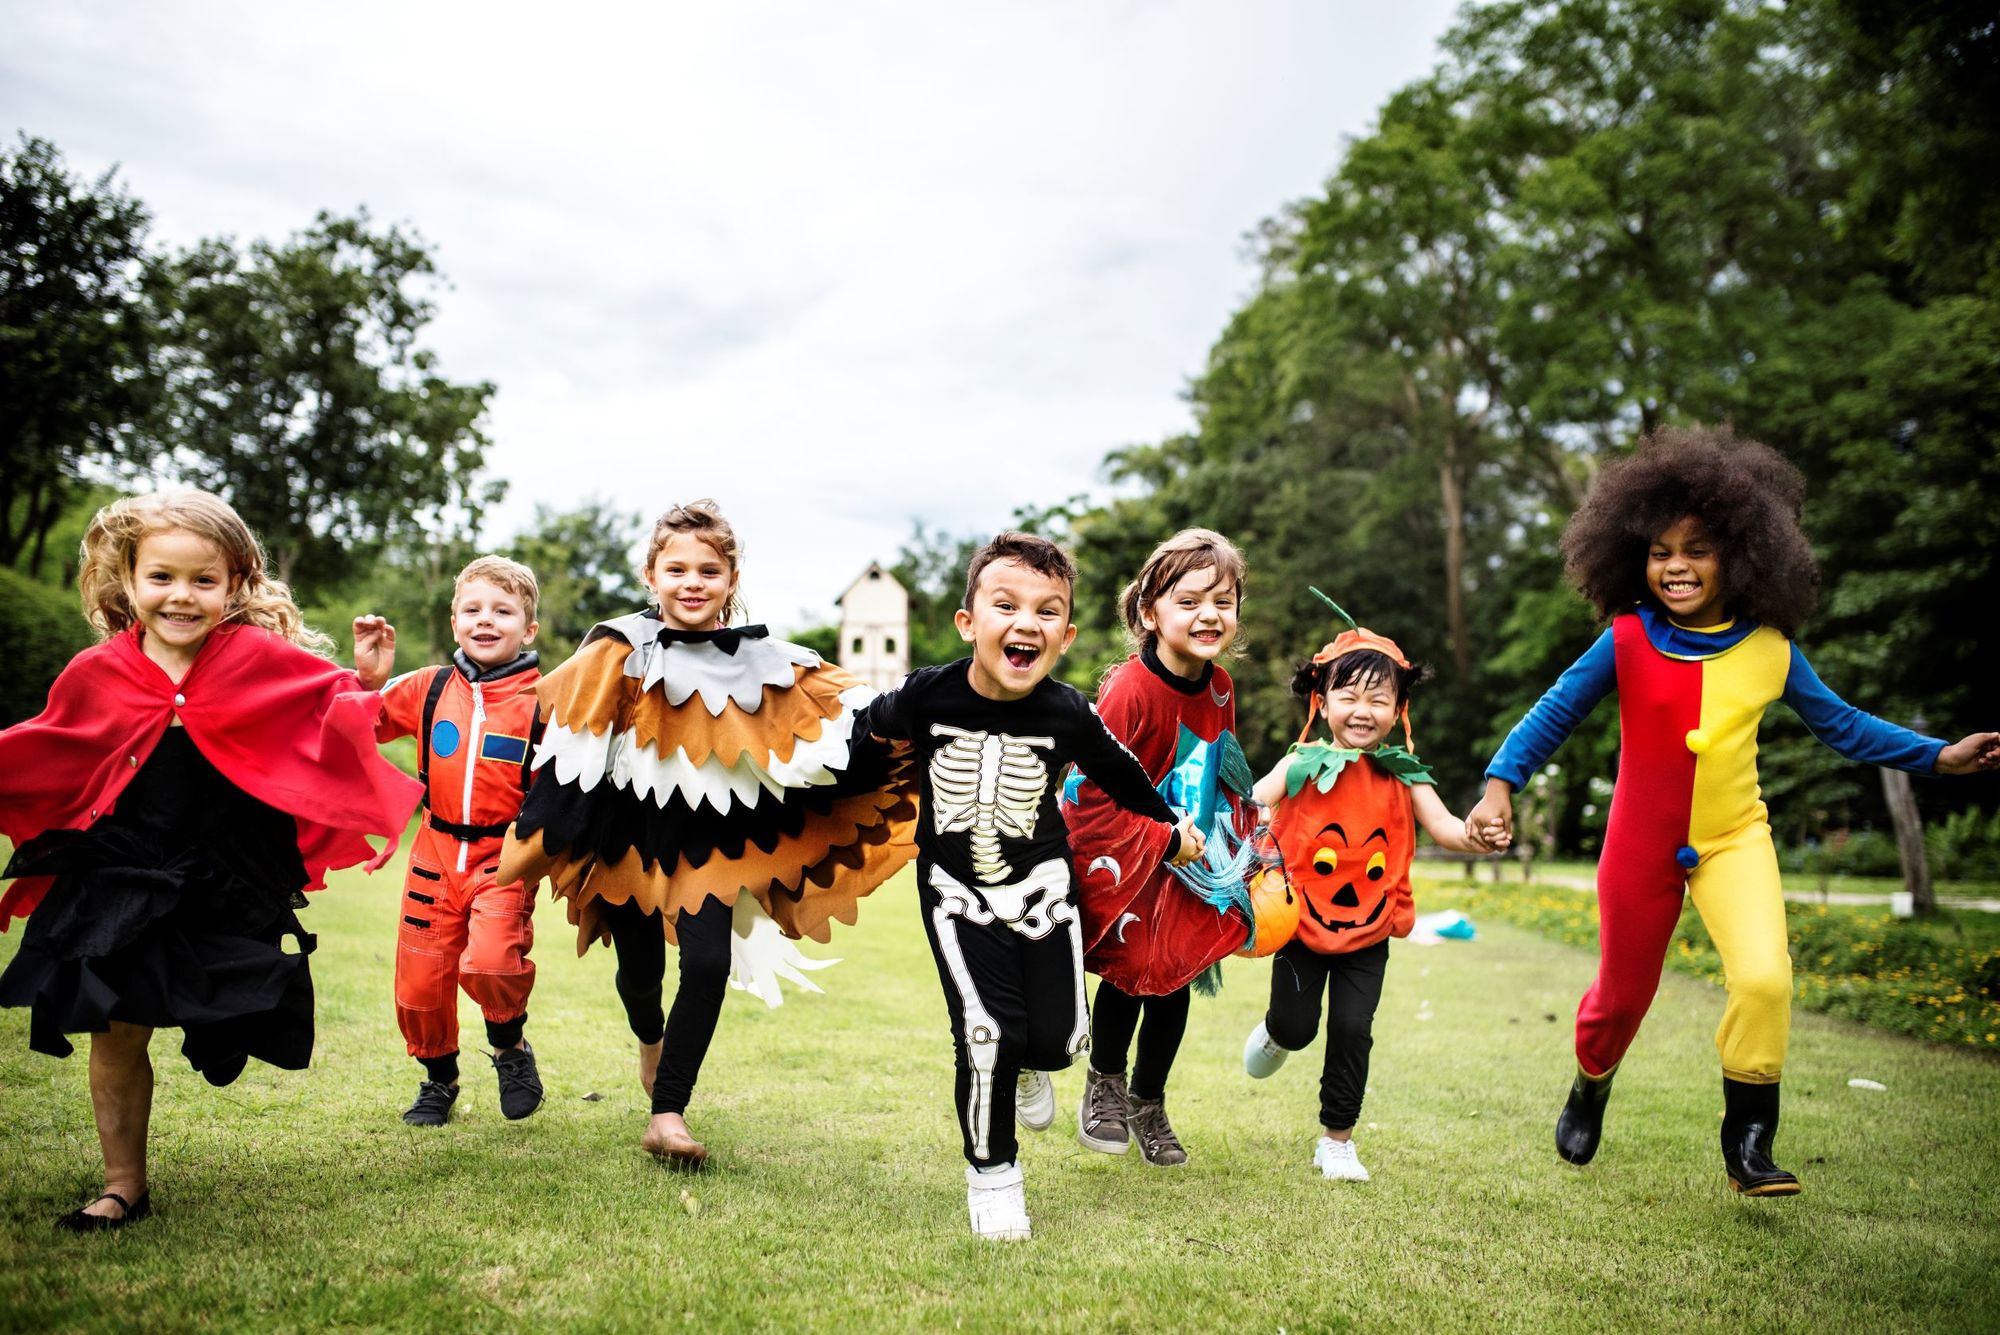 Little kids in costumes run around outside during a Halloween party